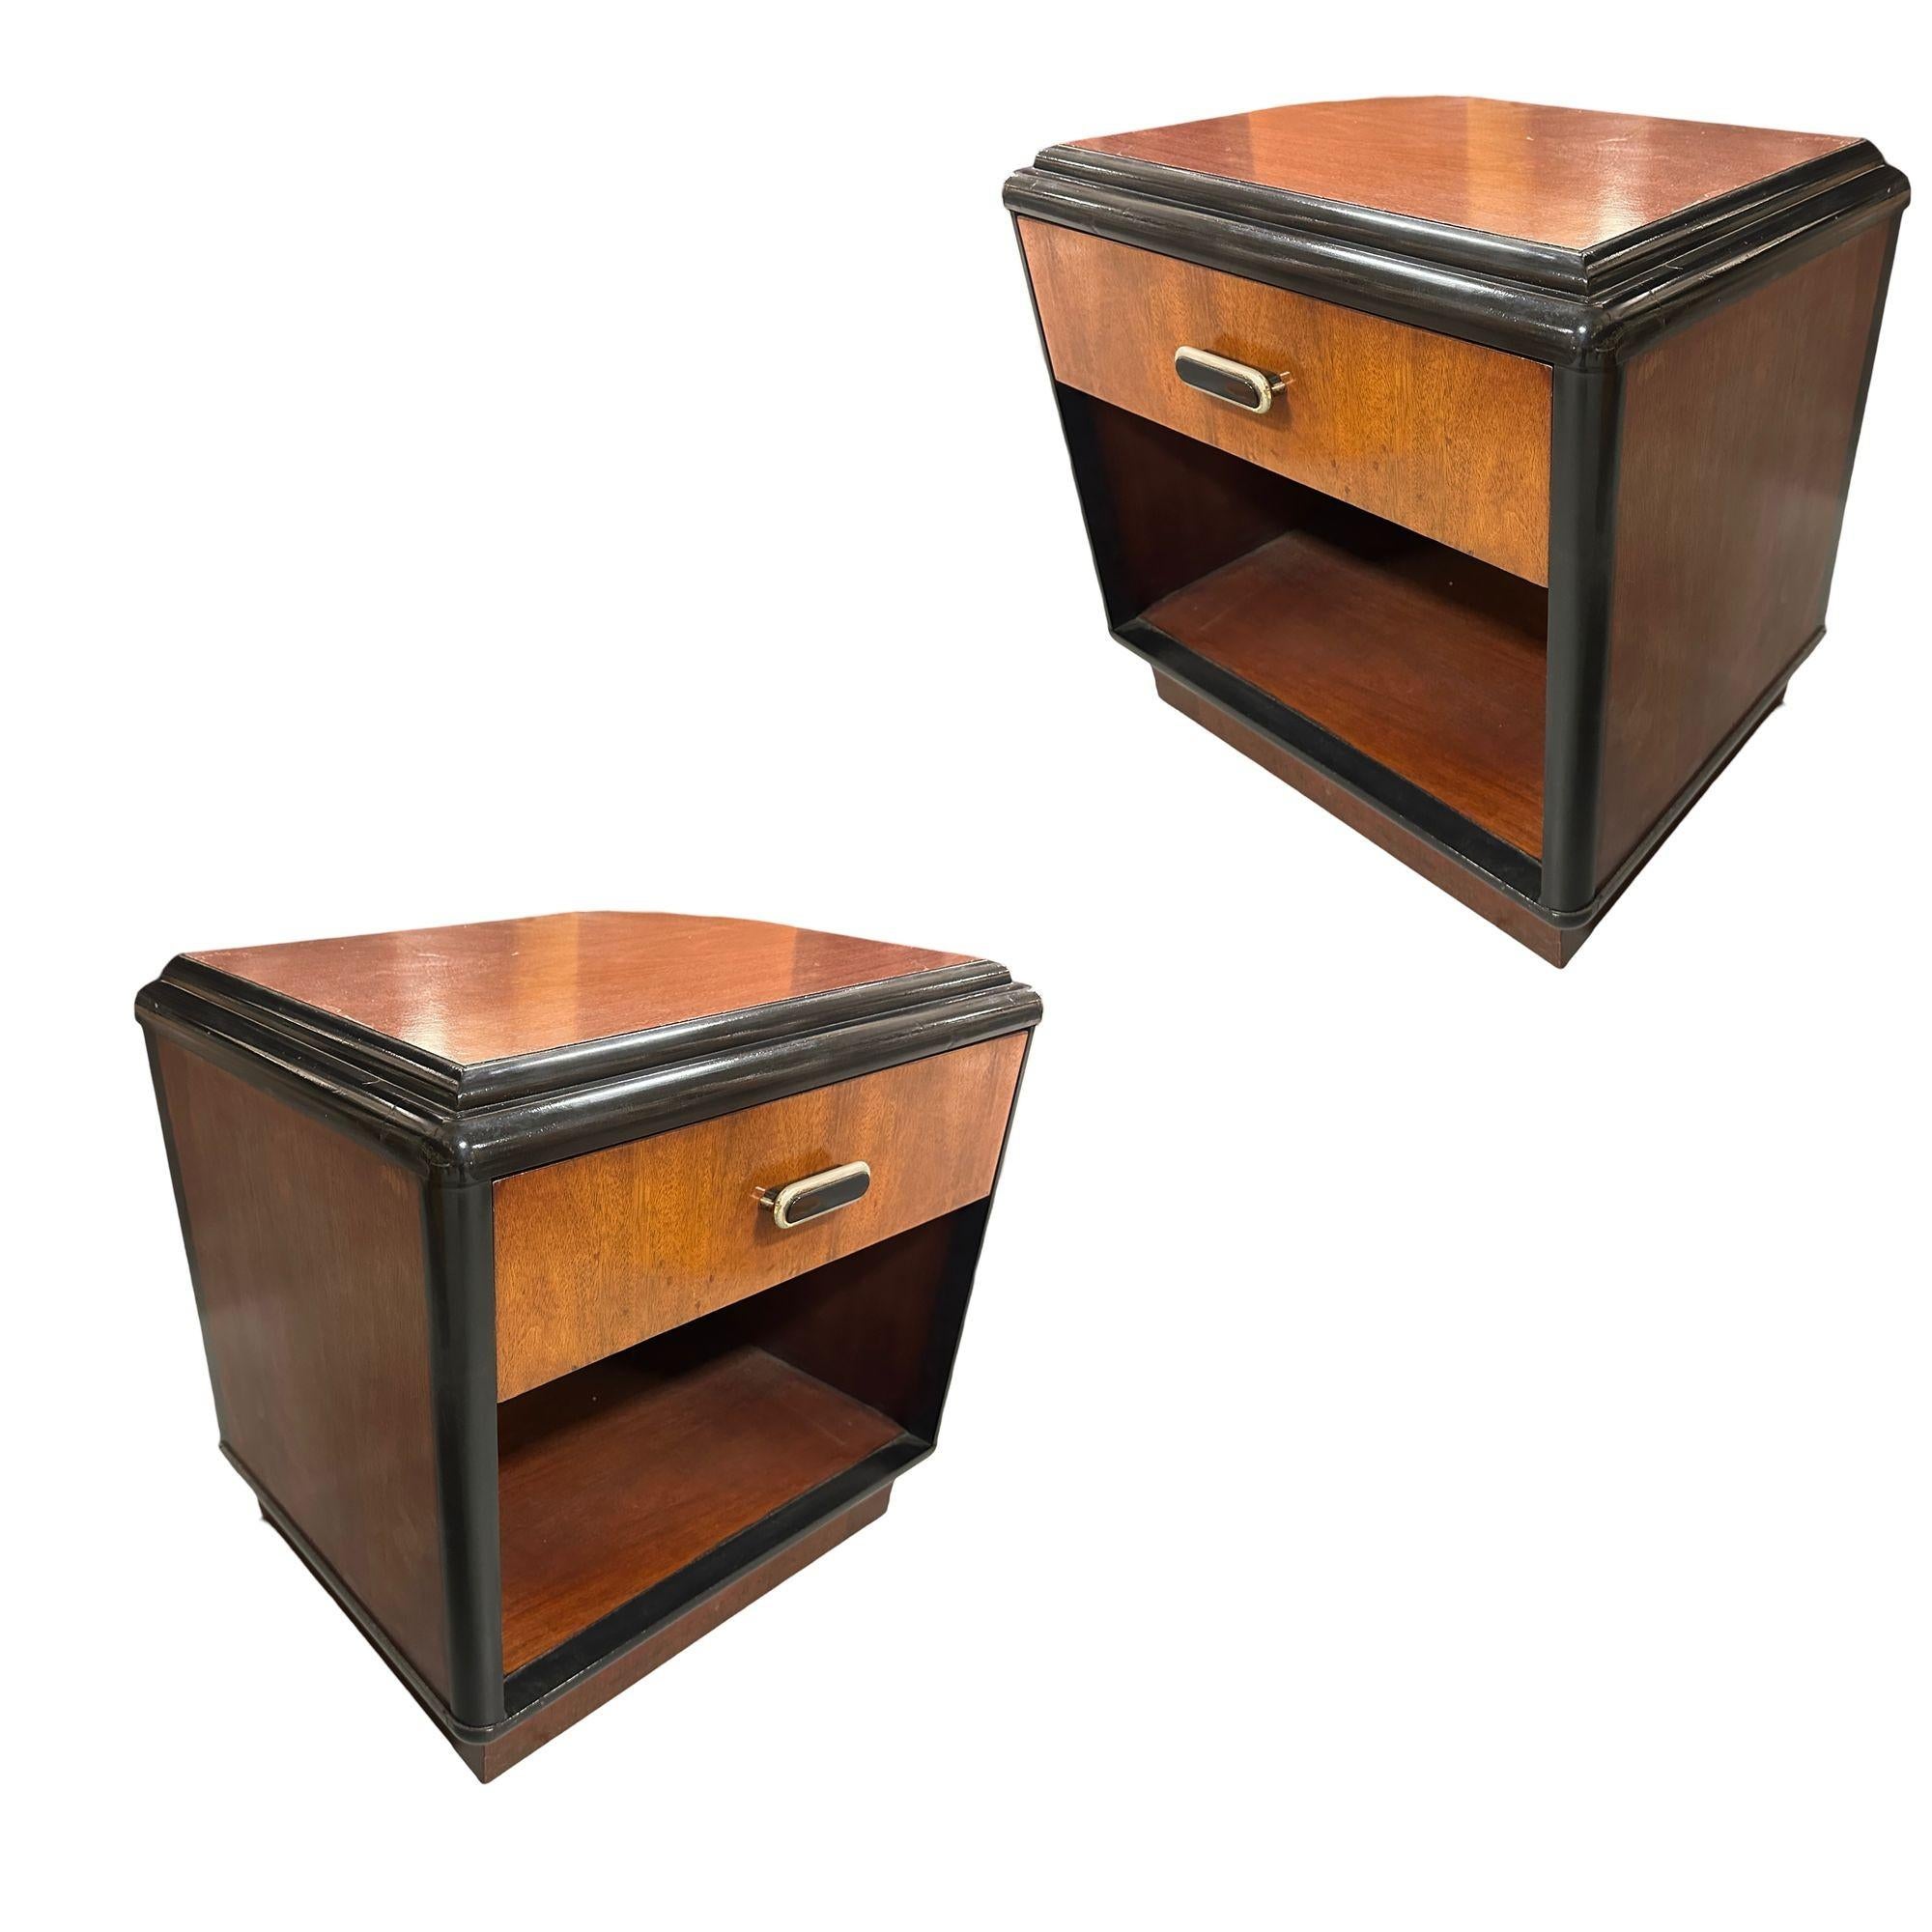 Pair of Two Toned Mid Century Modern Cherry Wood End Tables with Waterfall Edges